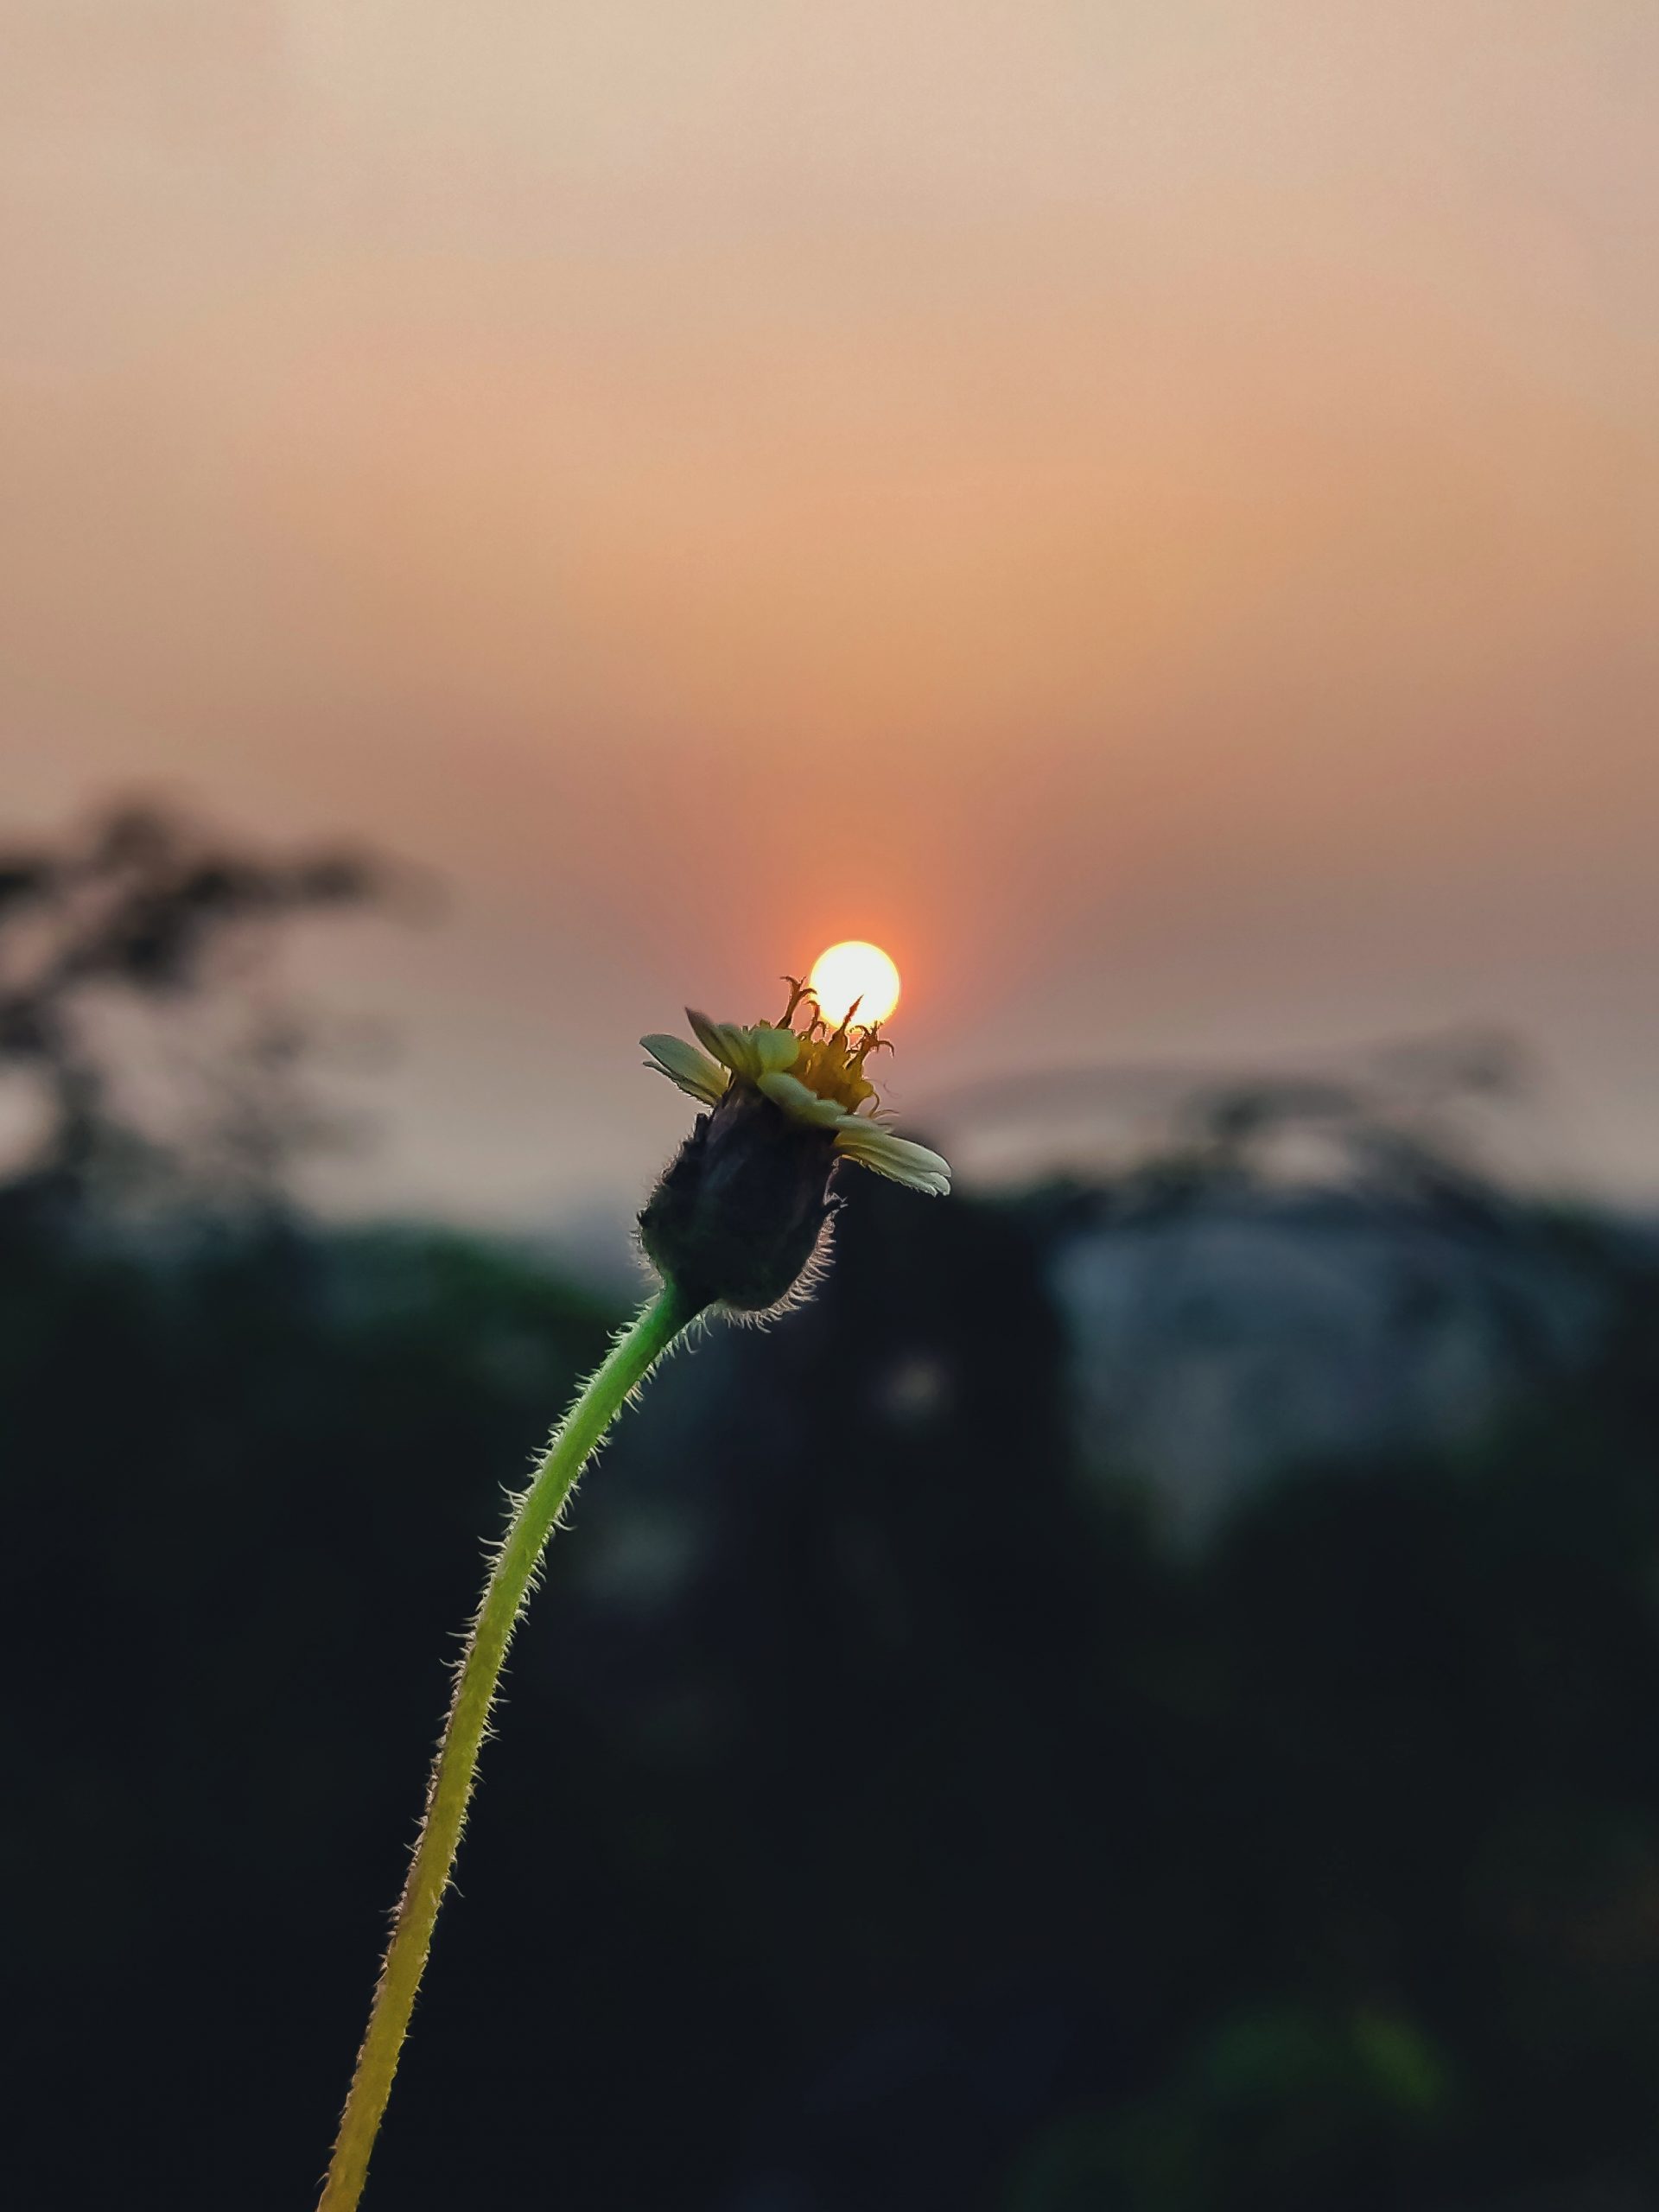 Flower and sunset